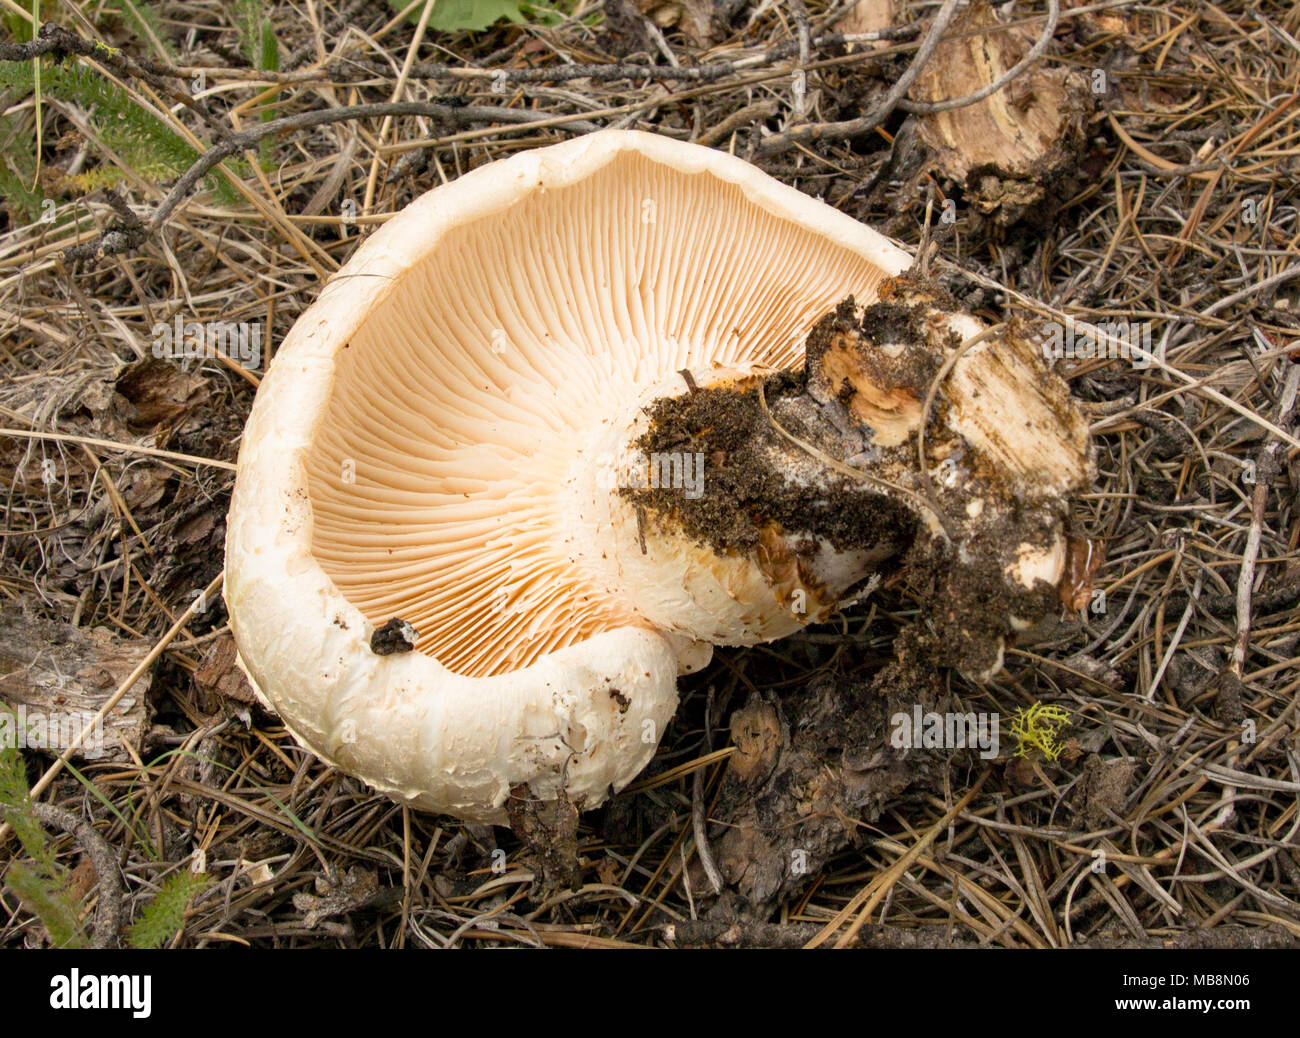 Giant Sawgill. Neolentinus ponderosus. The mushroom was found along the Ross Fork of Rock Creek, in the Pintler Mountains of western Montana. Stock Photo